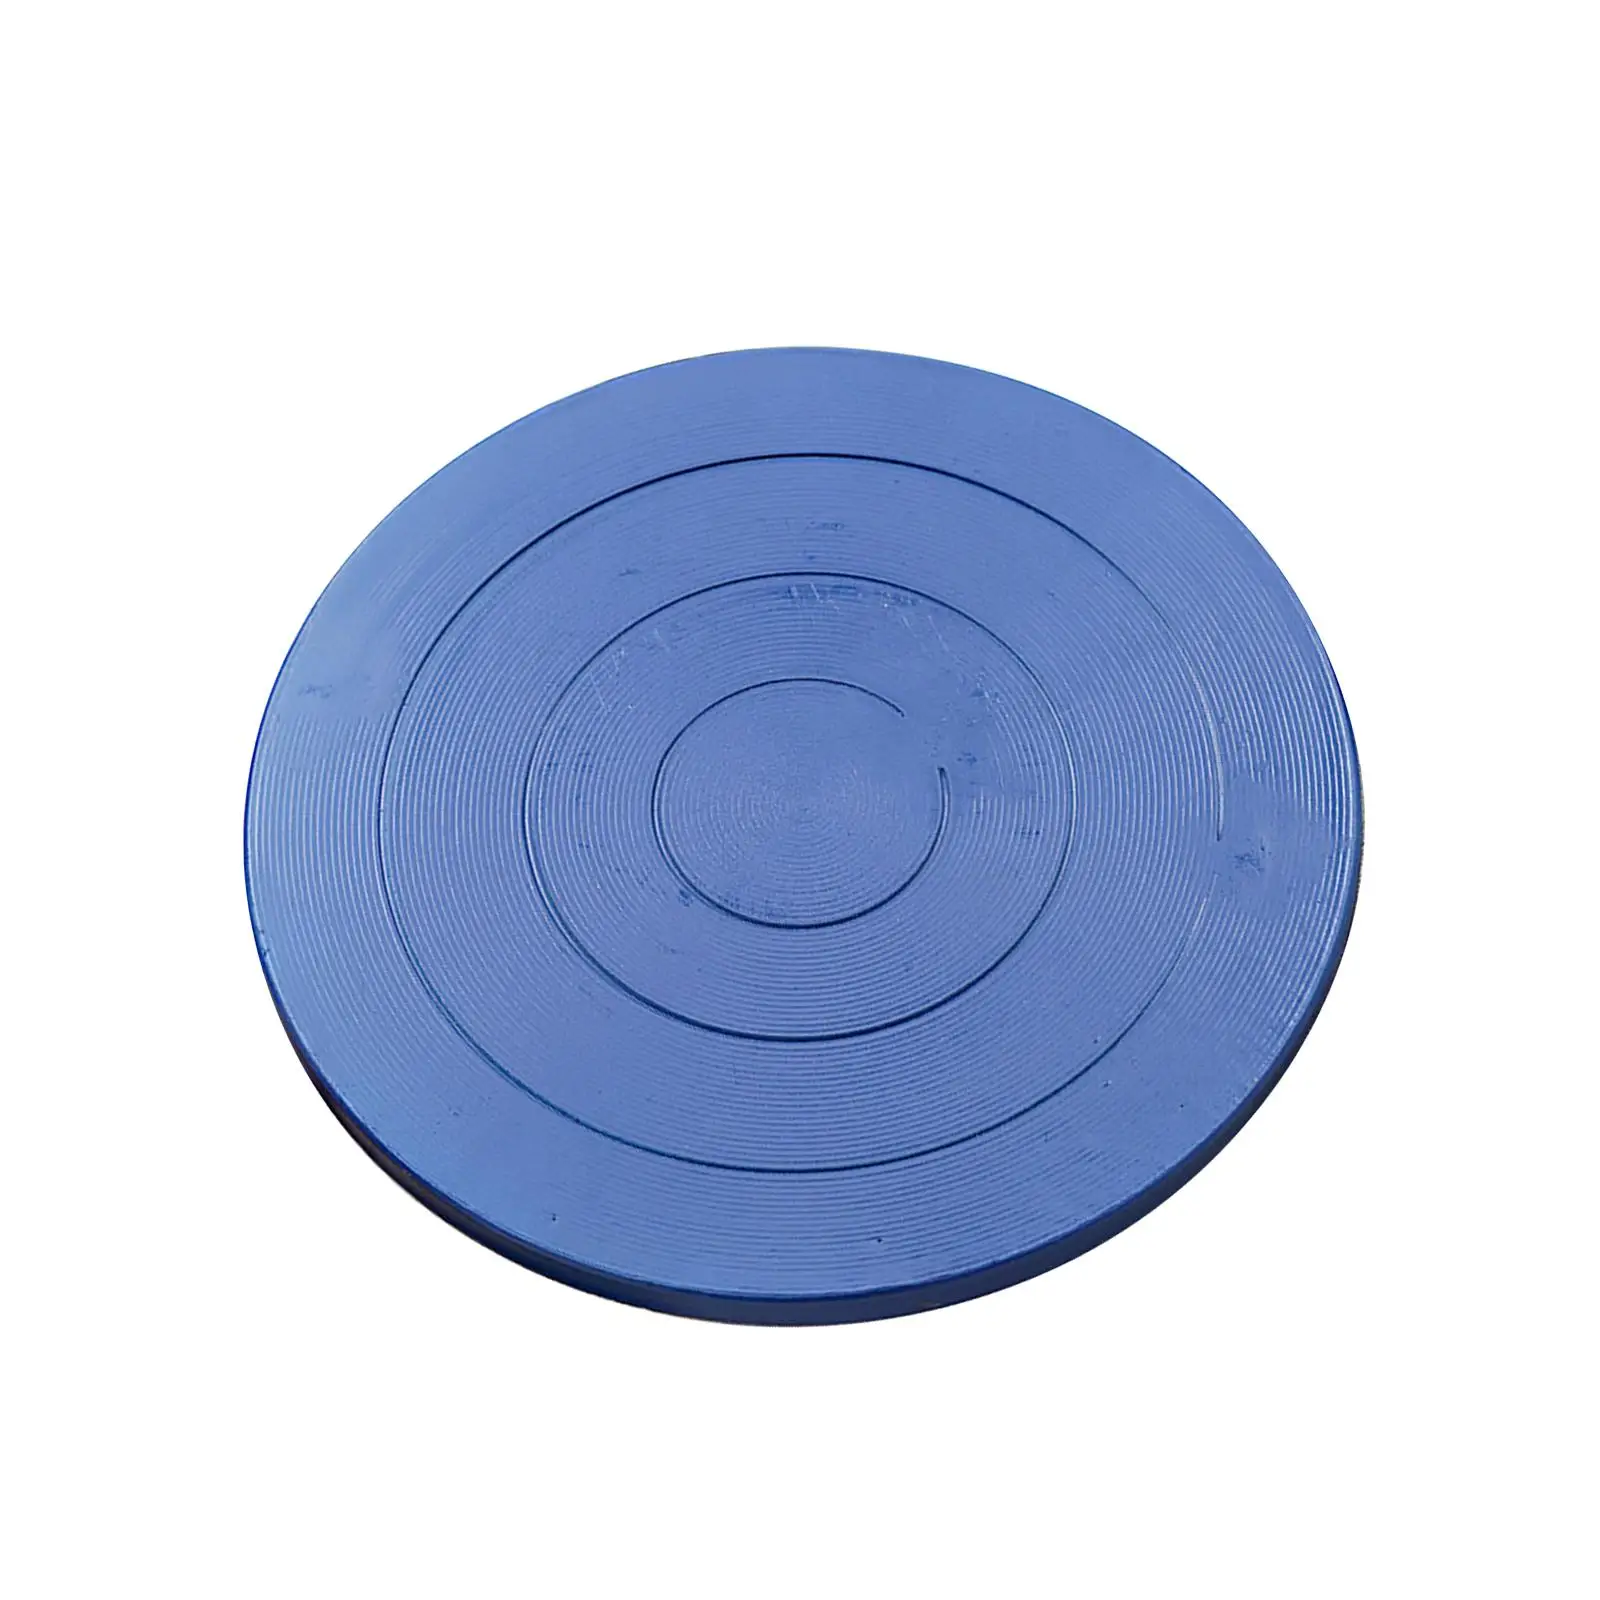 Sculpting Wheel Turntable Pottery Decorating Banding Wheel with Ball Bearings Cast Clay Ceramics Pottery Sculpting Wheel